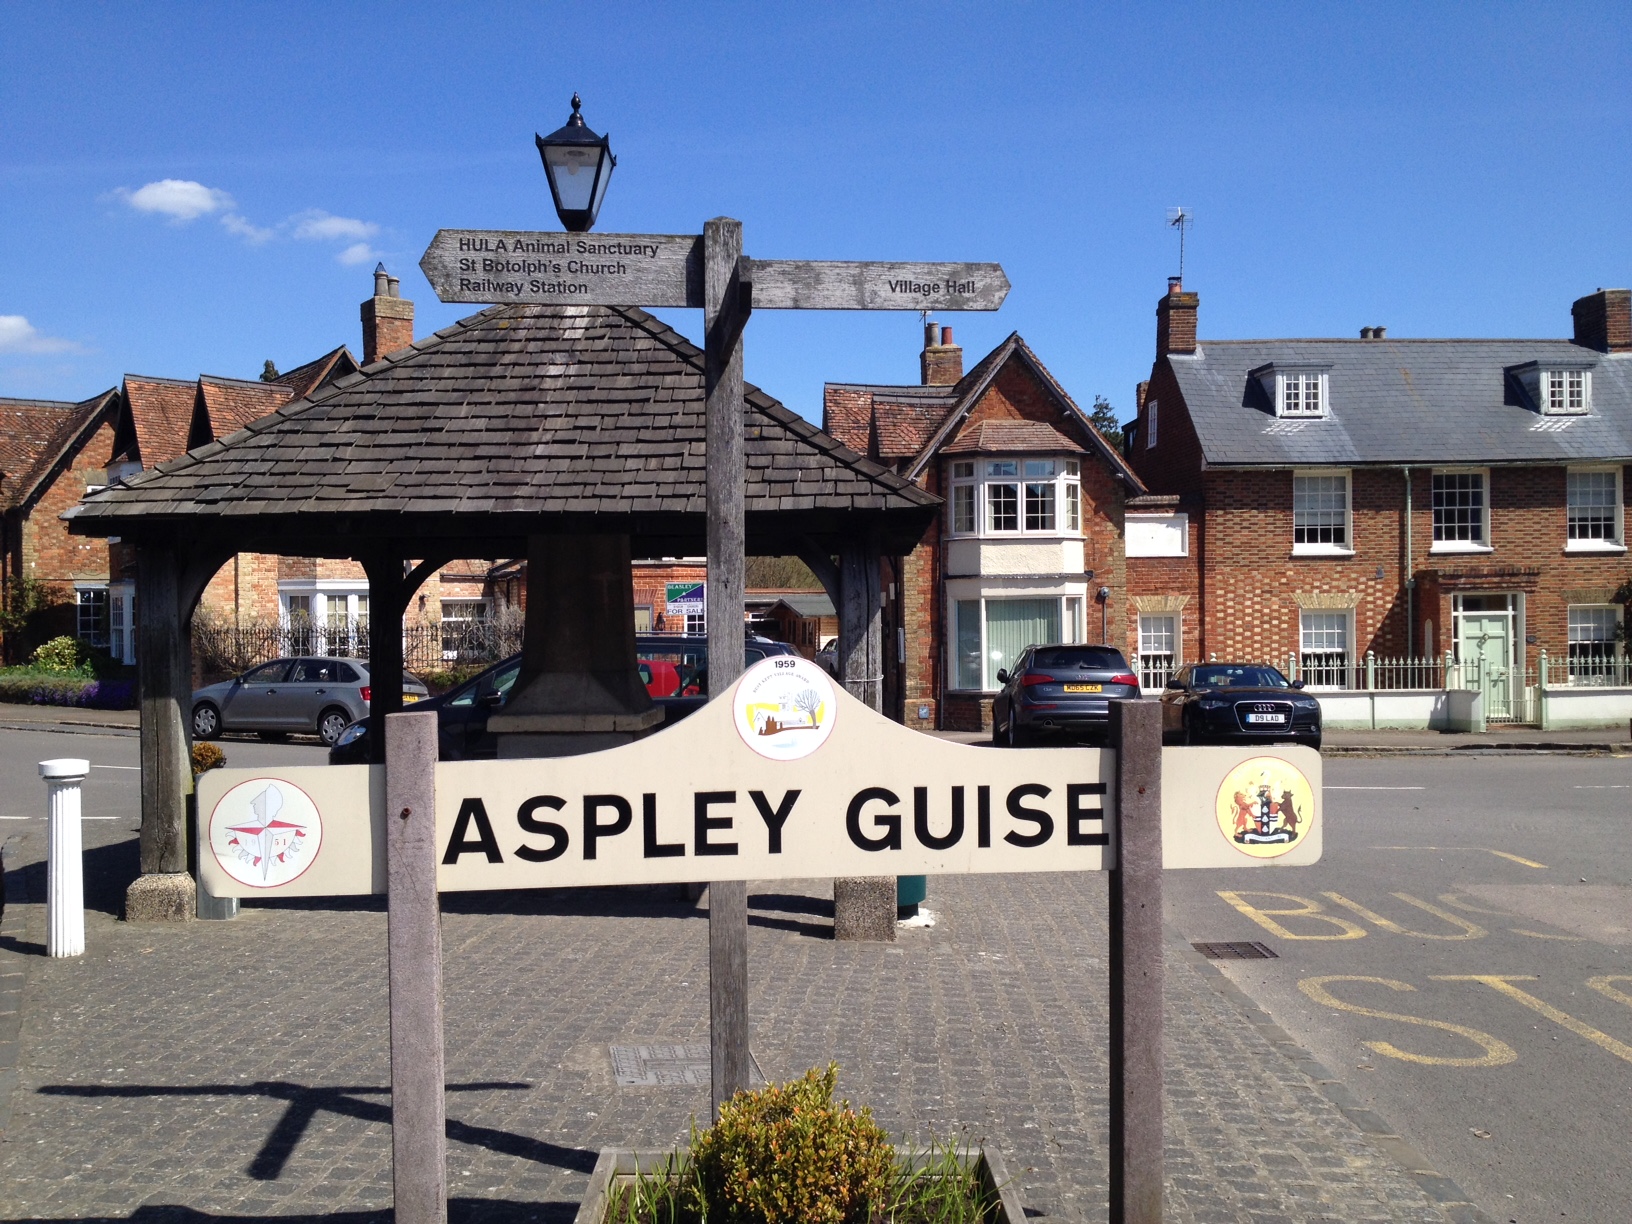 The center of The Square, Aspley Guise